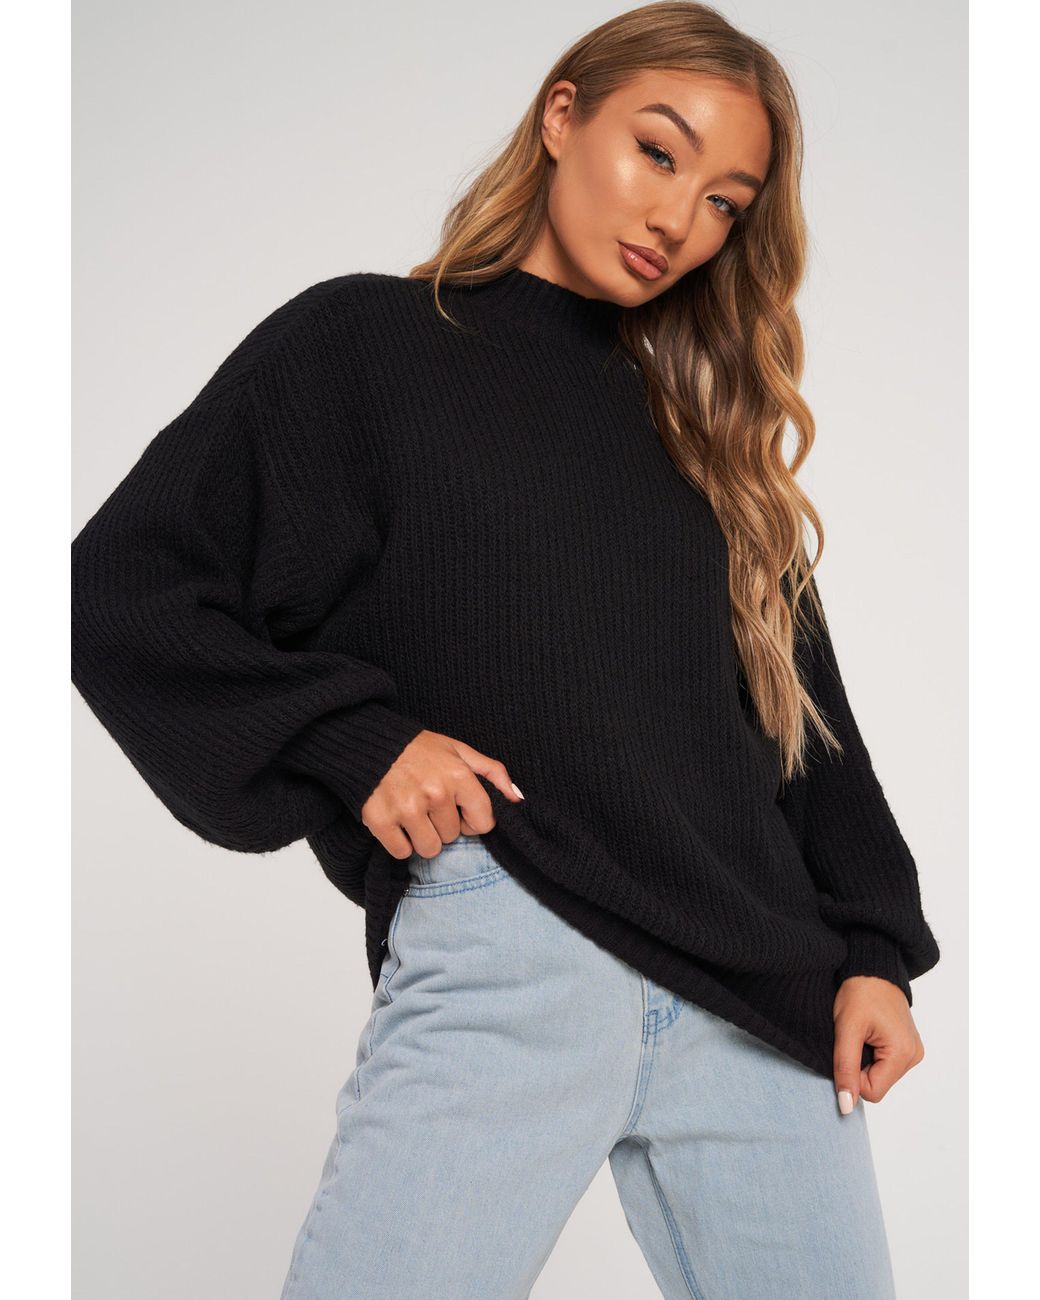 Missguided Synthetic Knit High Neck Boyfriend Jumper in Black - Lyst